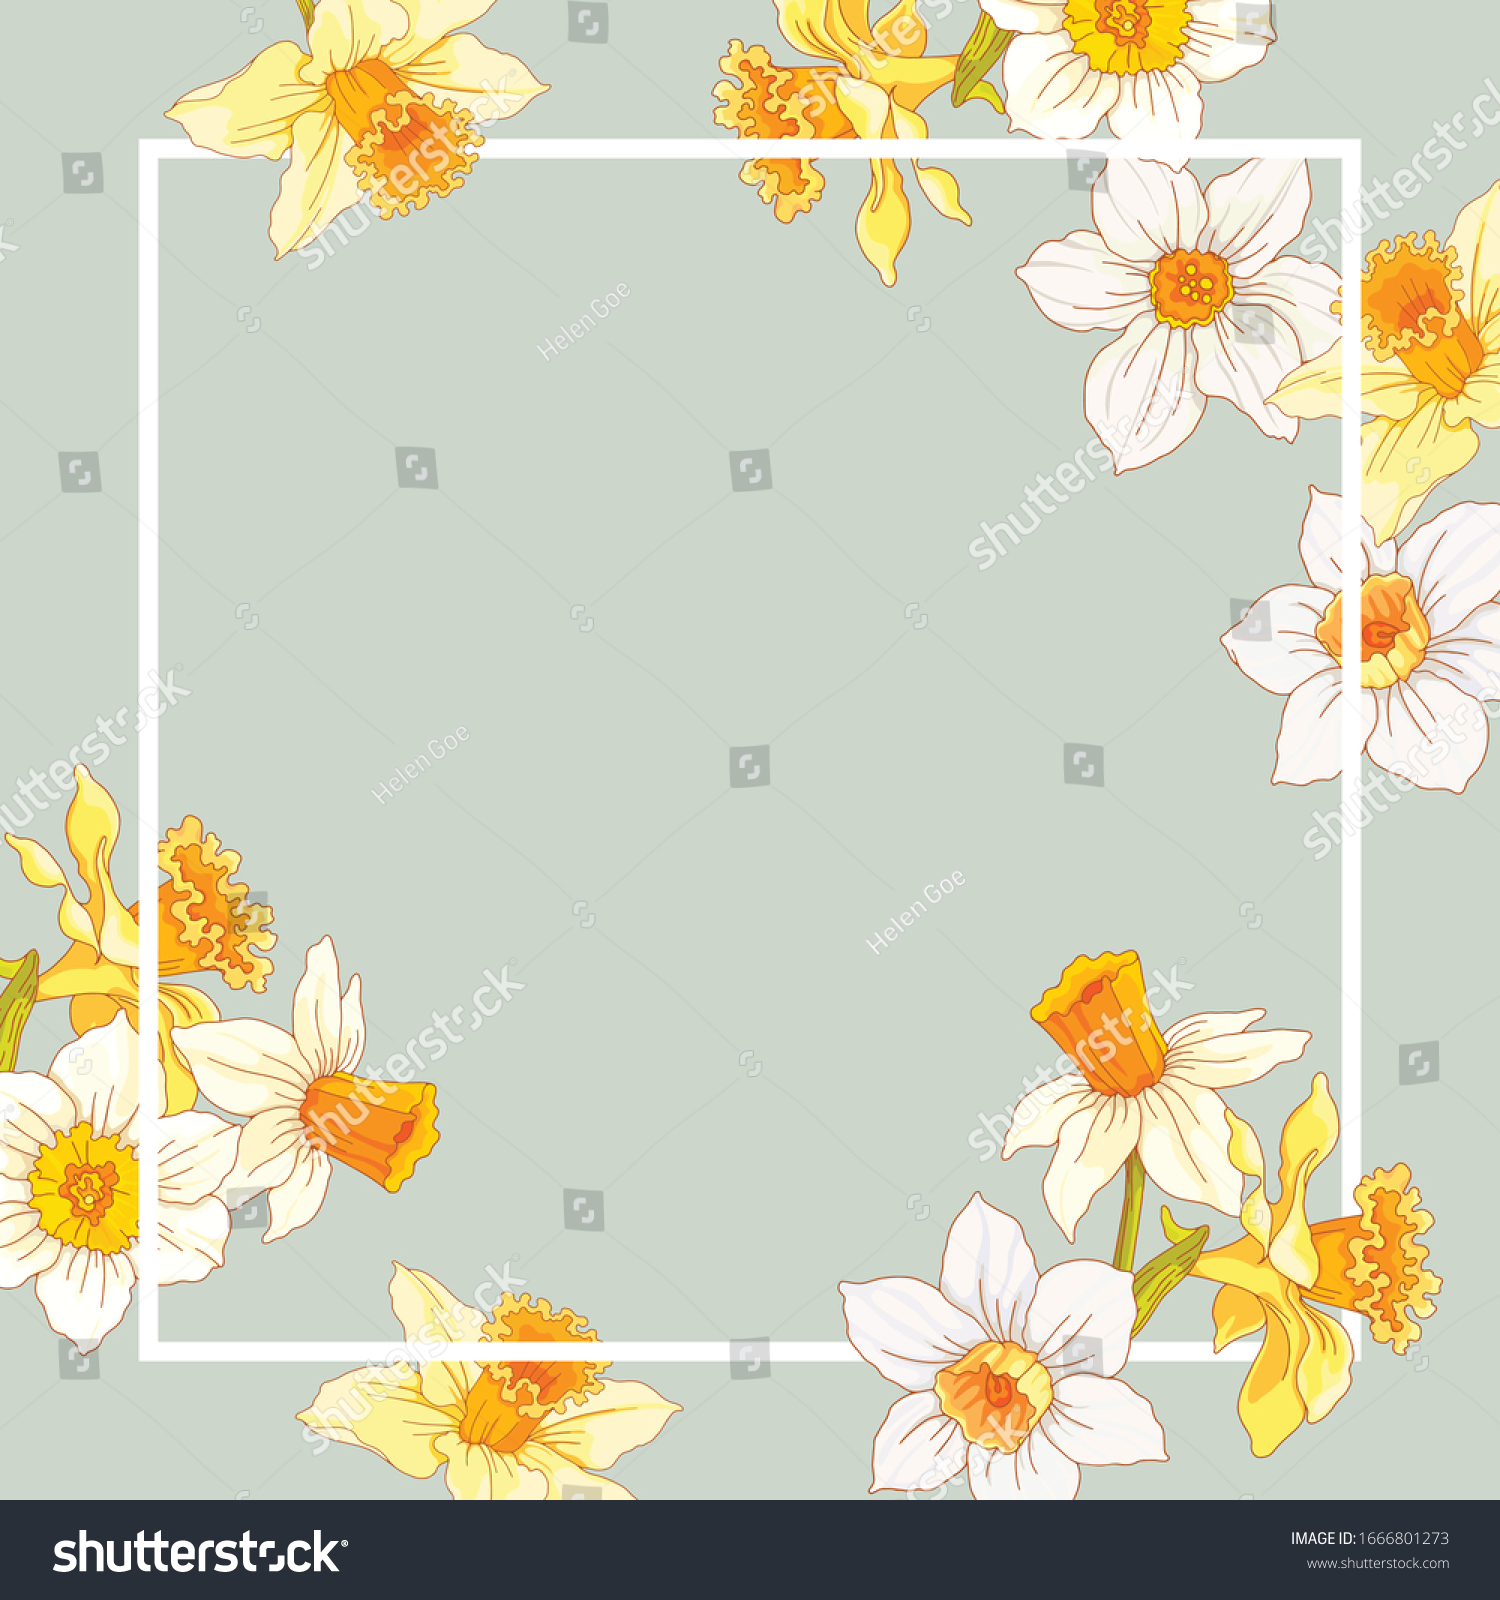 SVG of White rectangular frame on a background of pale yellow and white flowers of a daffodil. Design element for banners, cards, flyers.
 svg